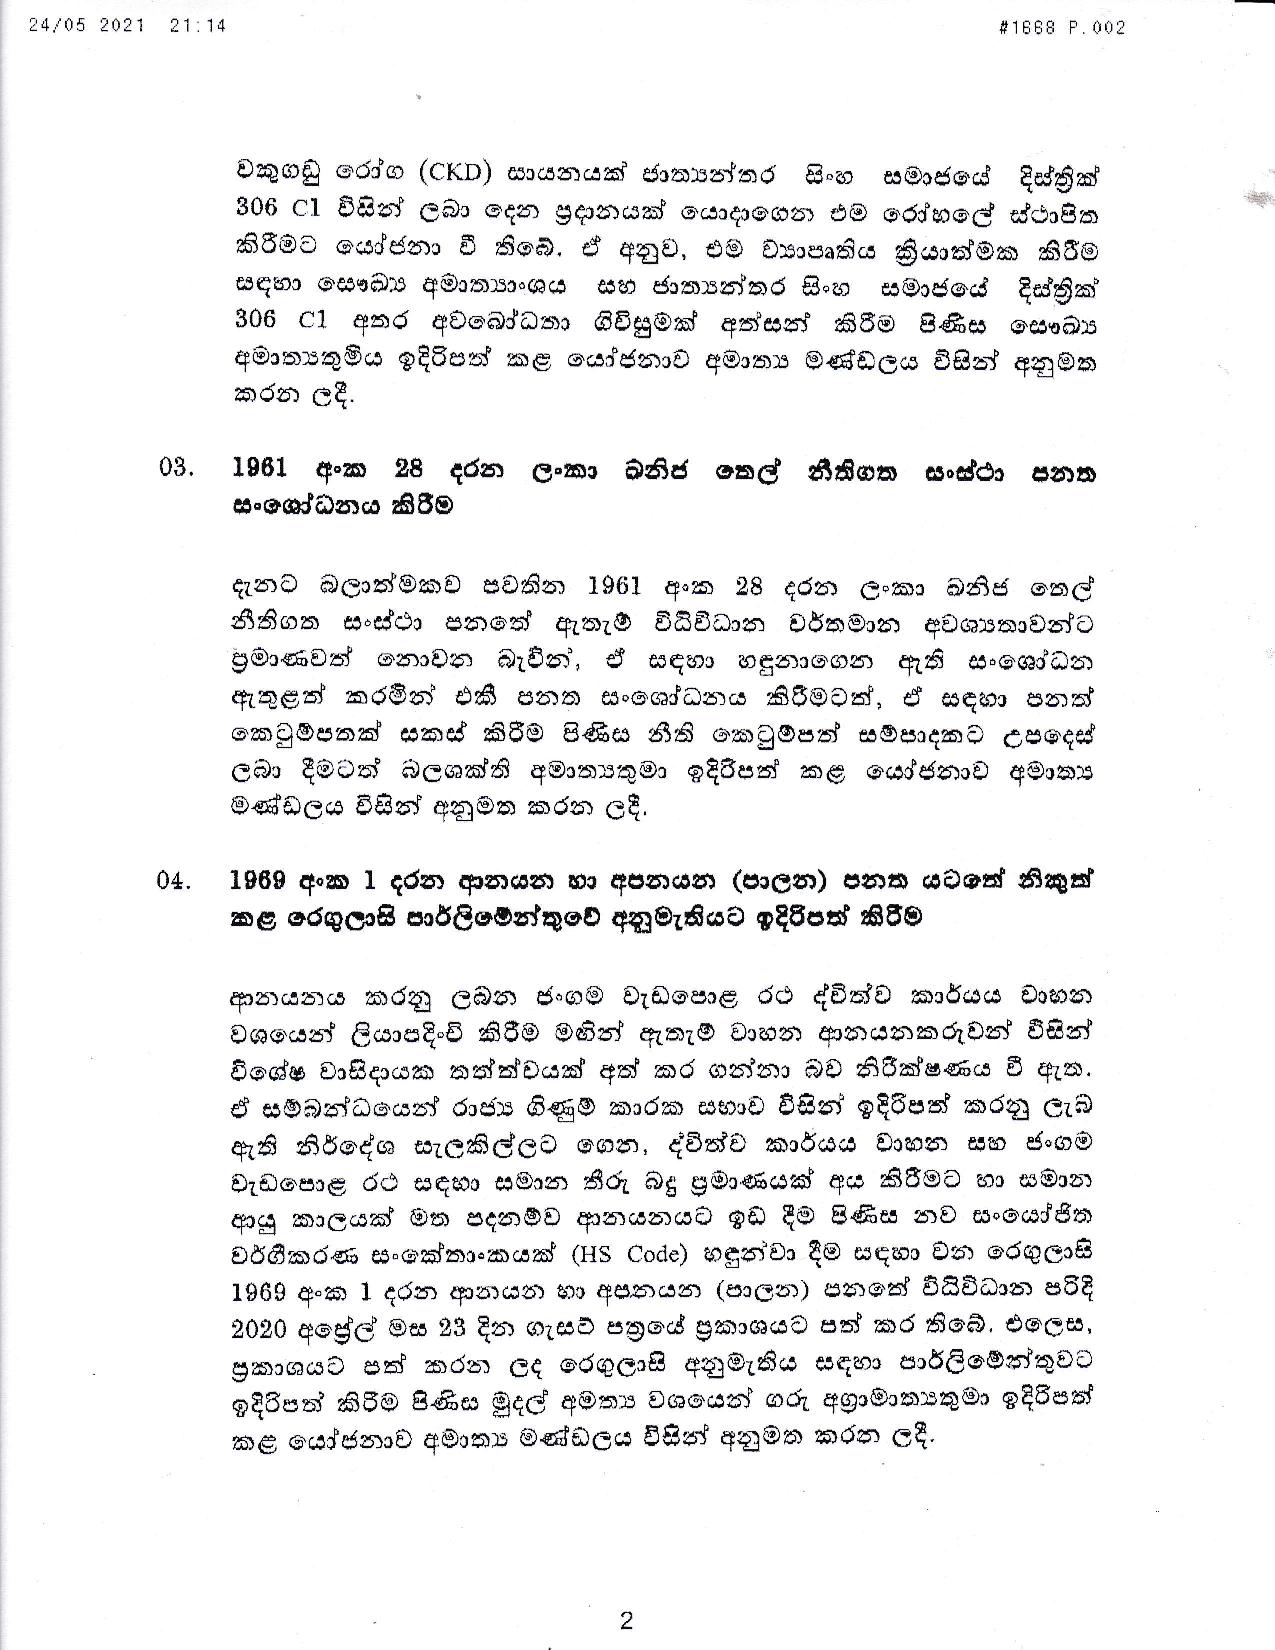 Cabinet Decisions on 24.05.2021 2 page 002